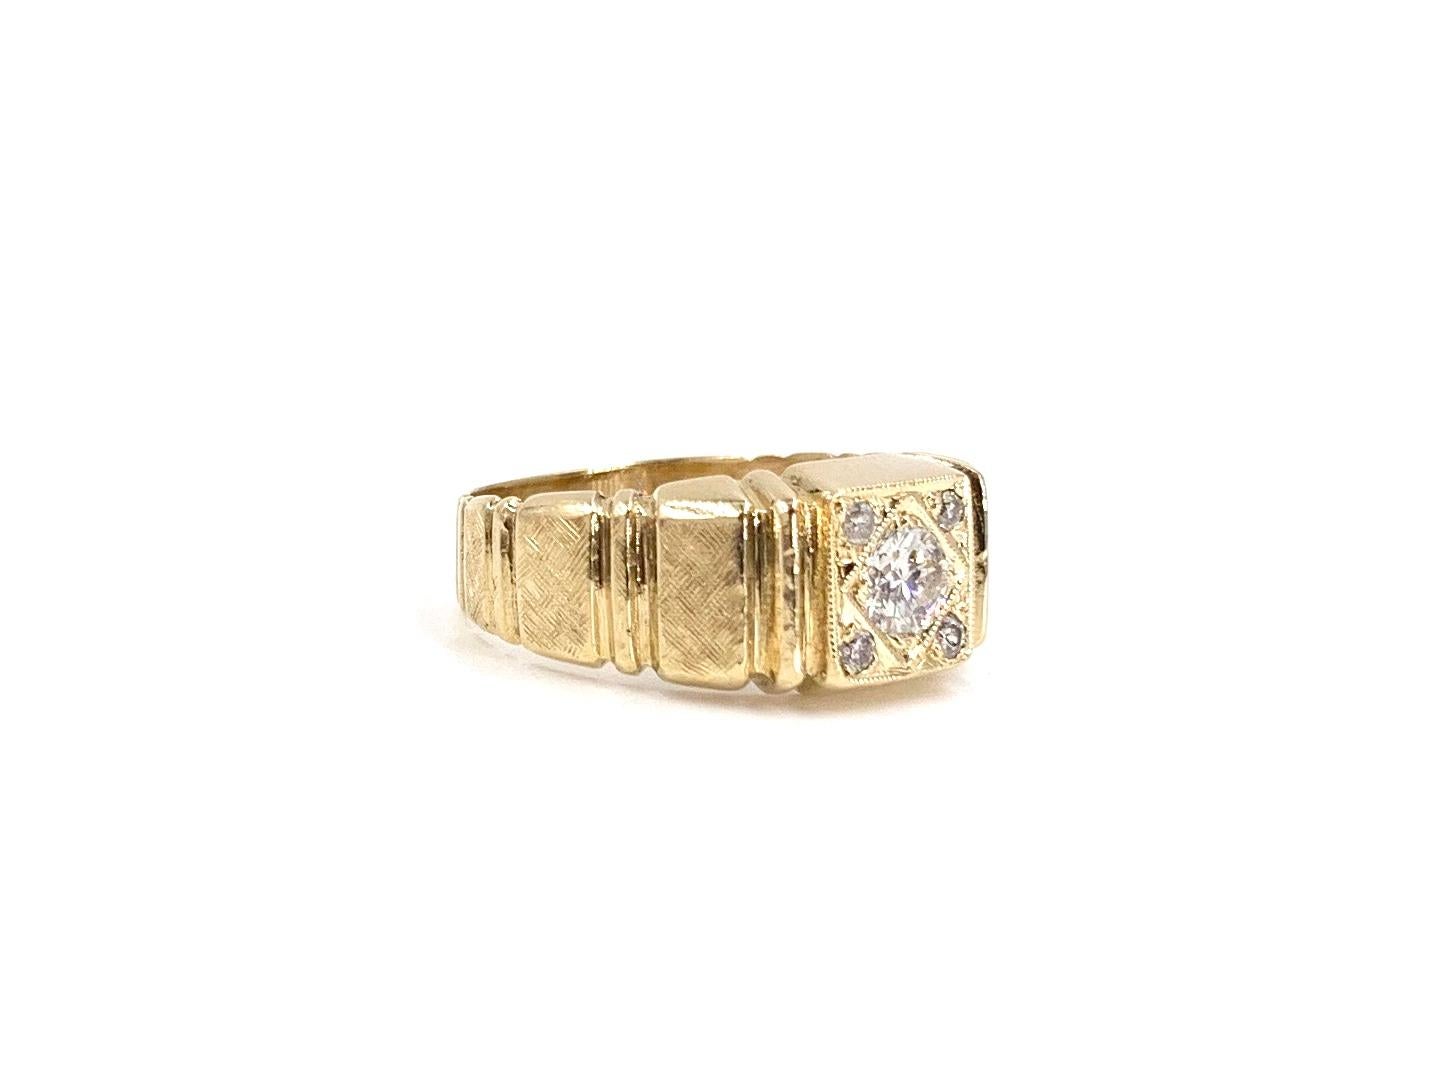 A wearable 14 karat yellow gold flush set diamond ring featuring five round brilliant diamonds at approximately .37 carats total weight. Ring is adorned with a hand etched finish and vertical polished bars for added character. Center diamond quality